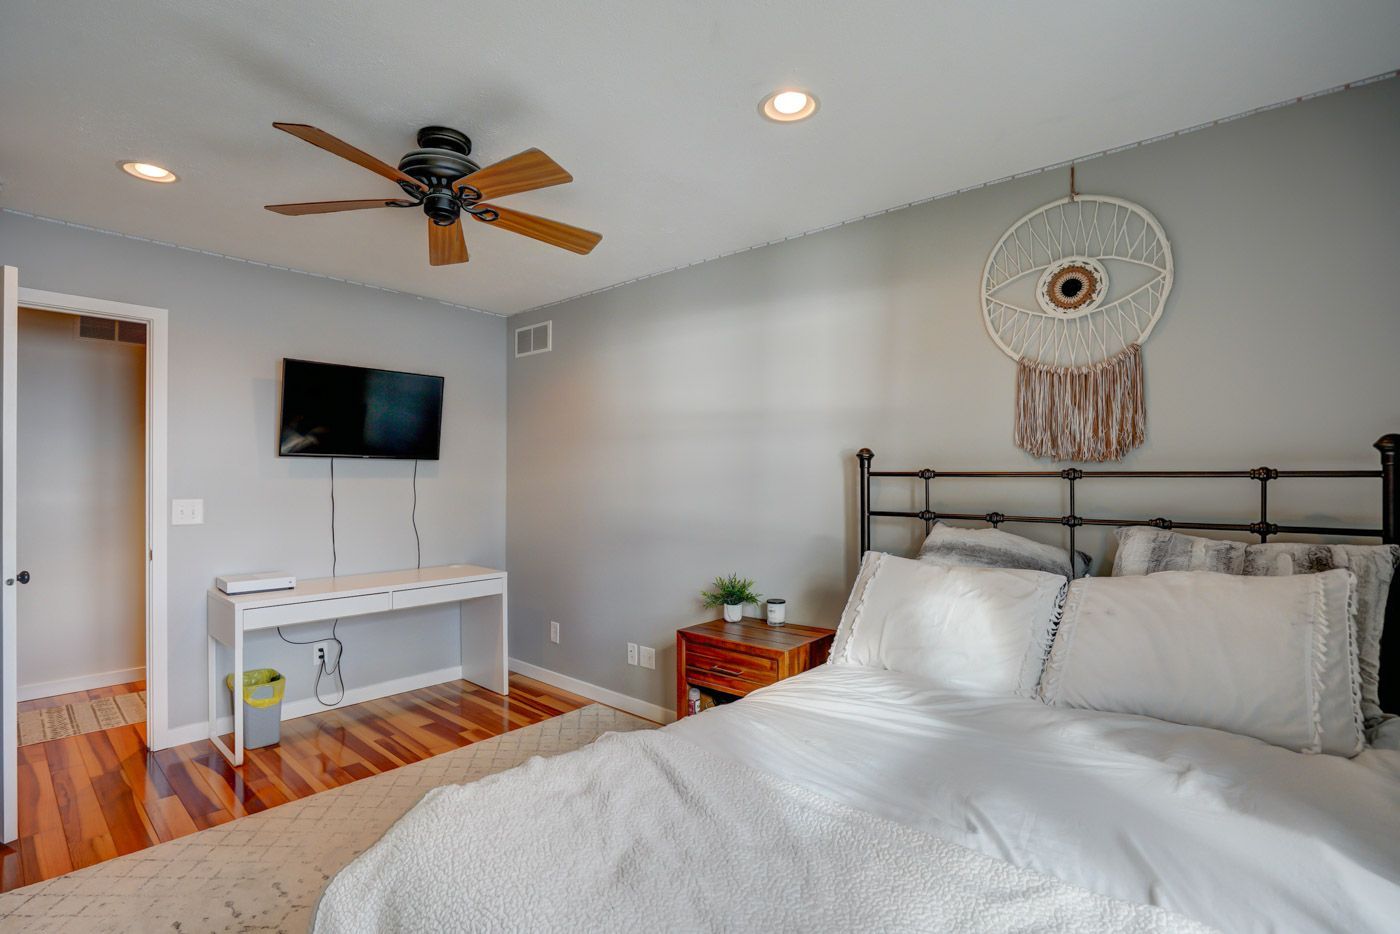 A bedroom with a bed , desk , television and ceiling fan.